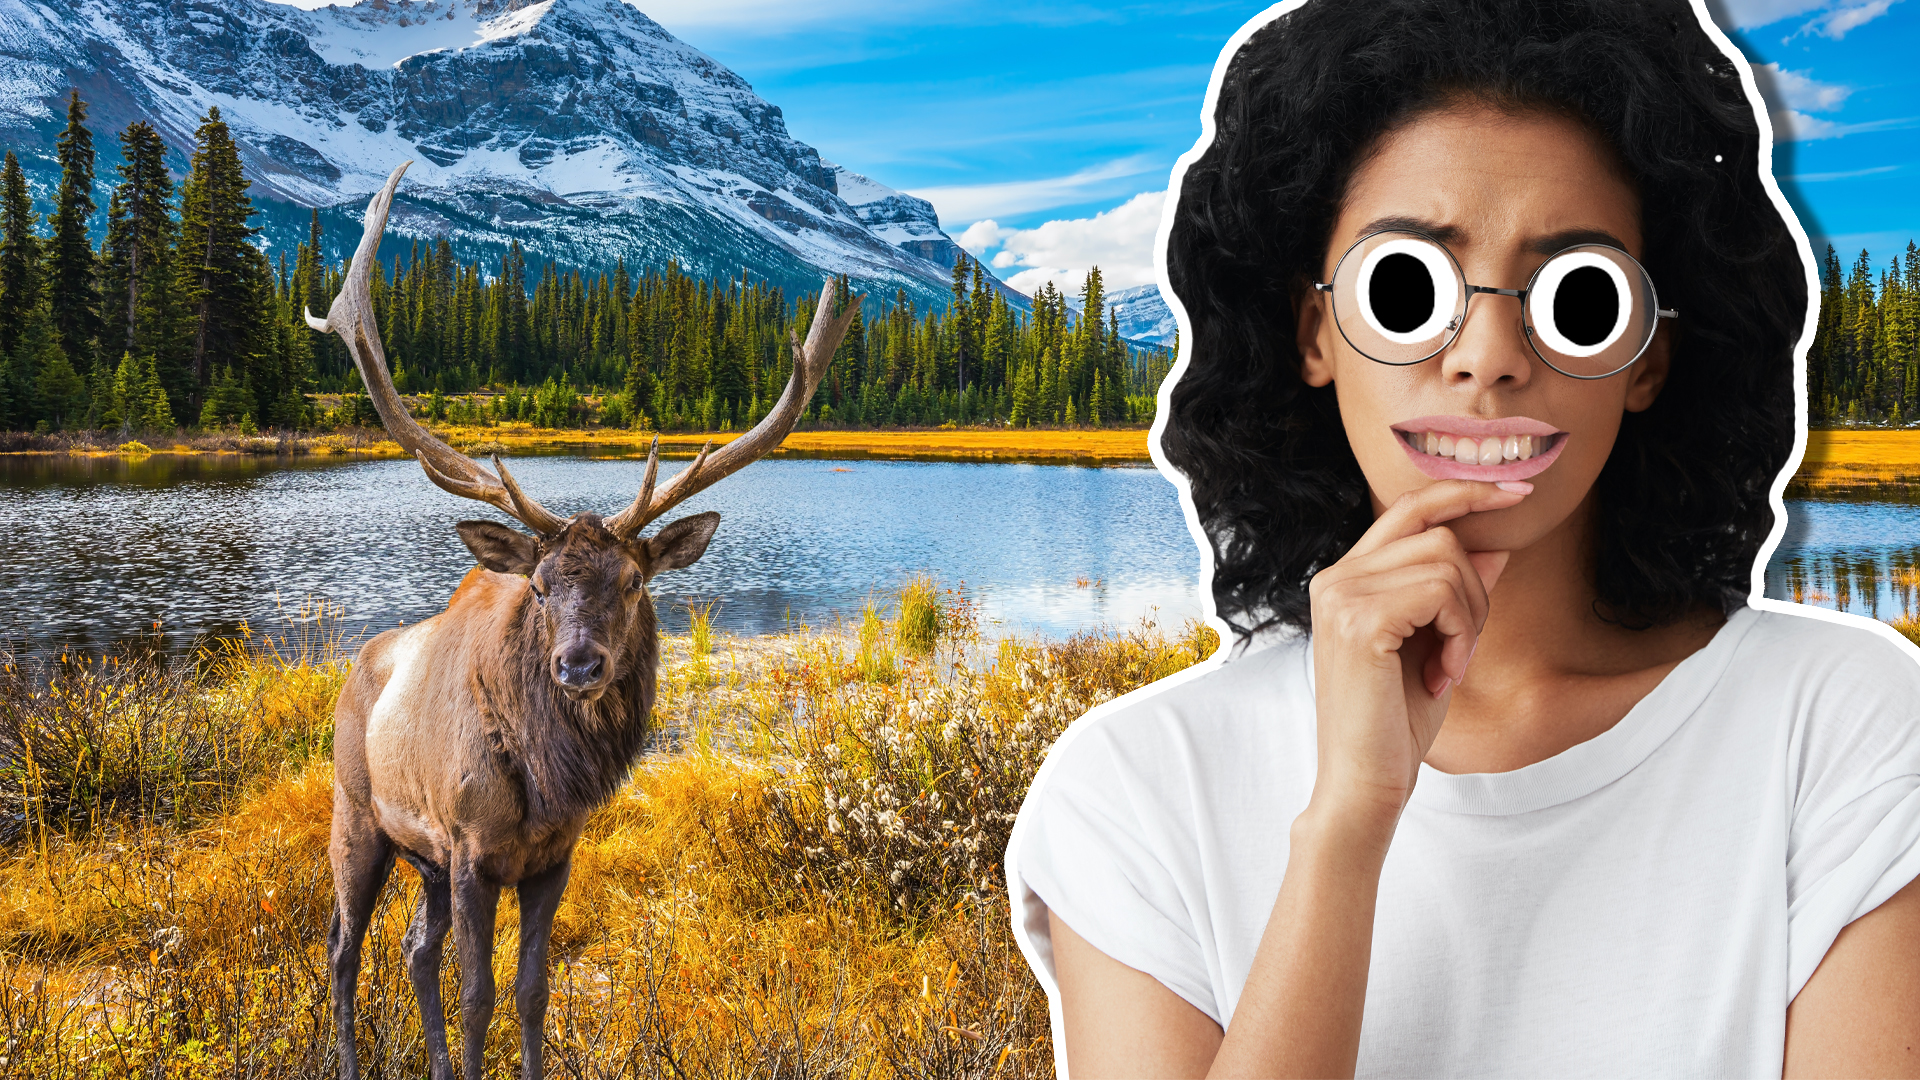 A woman and a moose in Canada